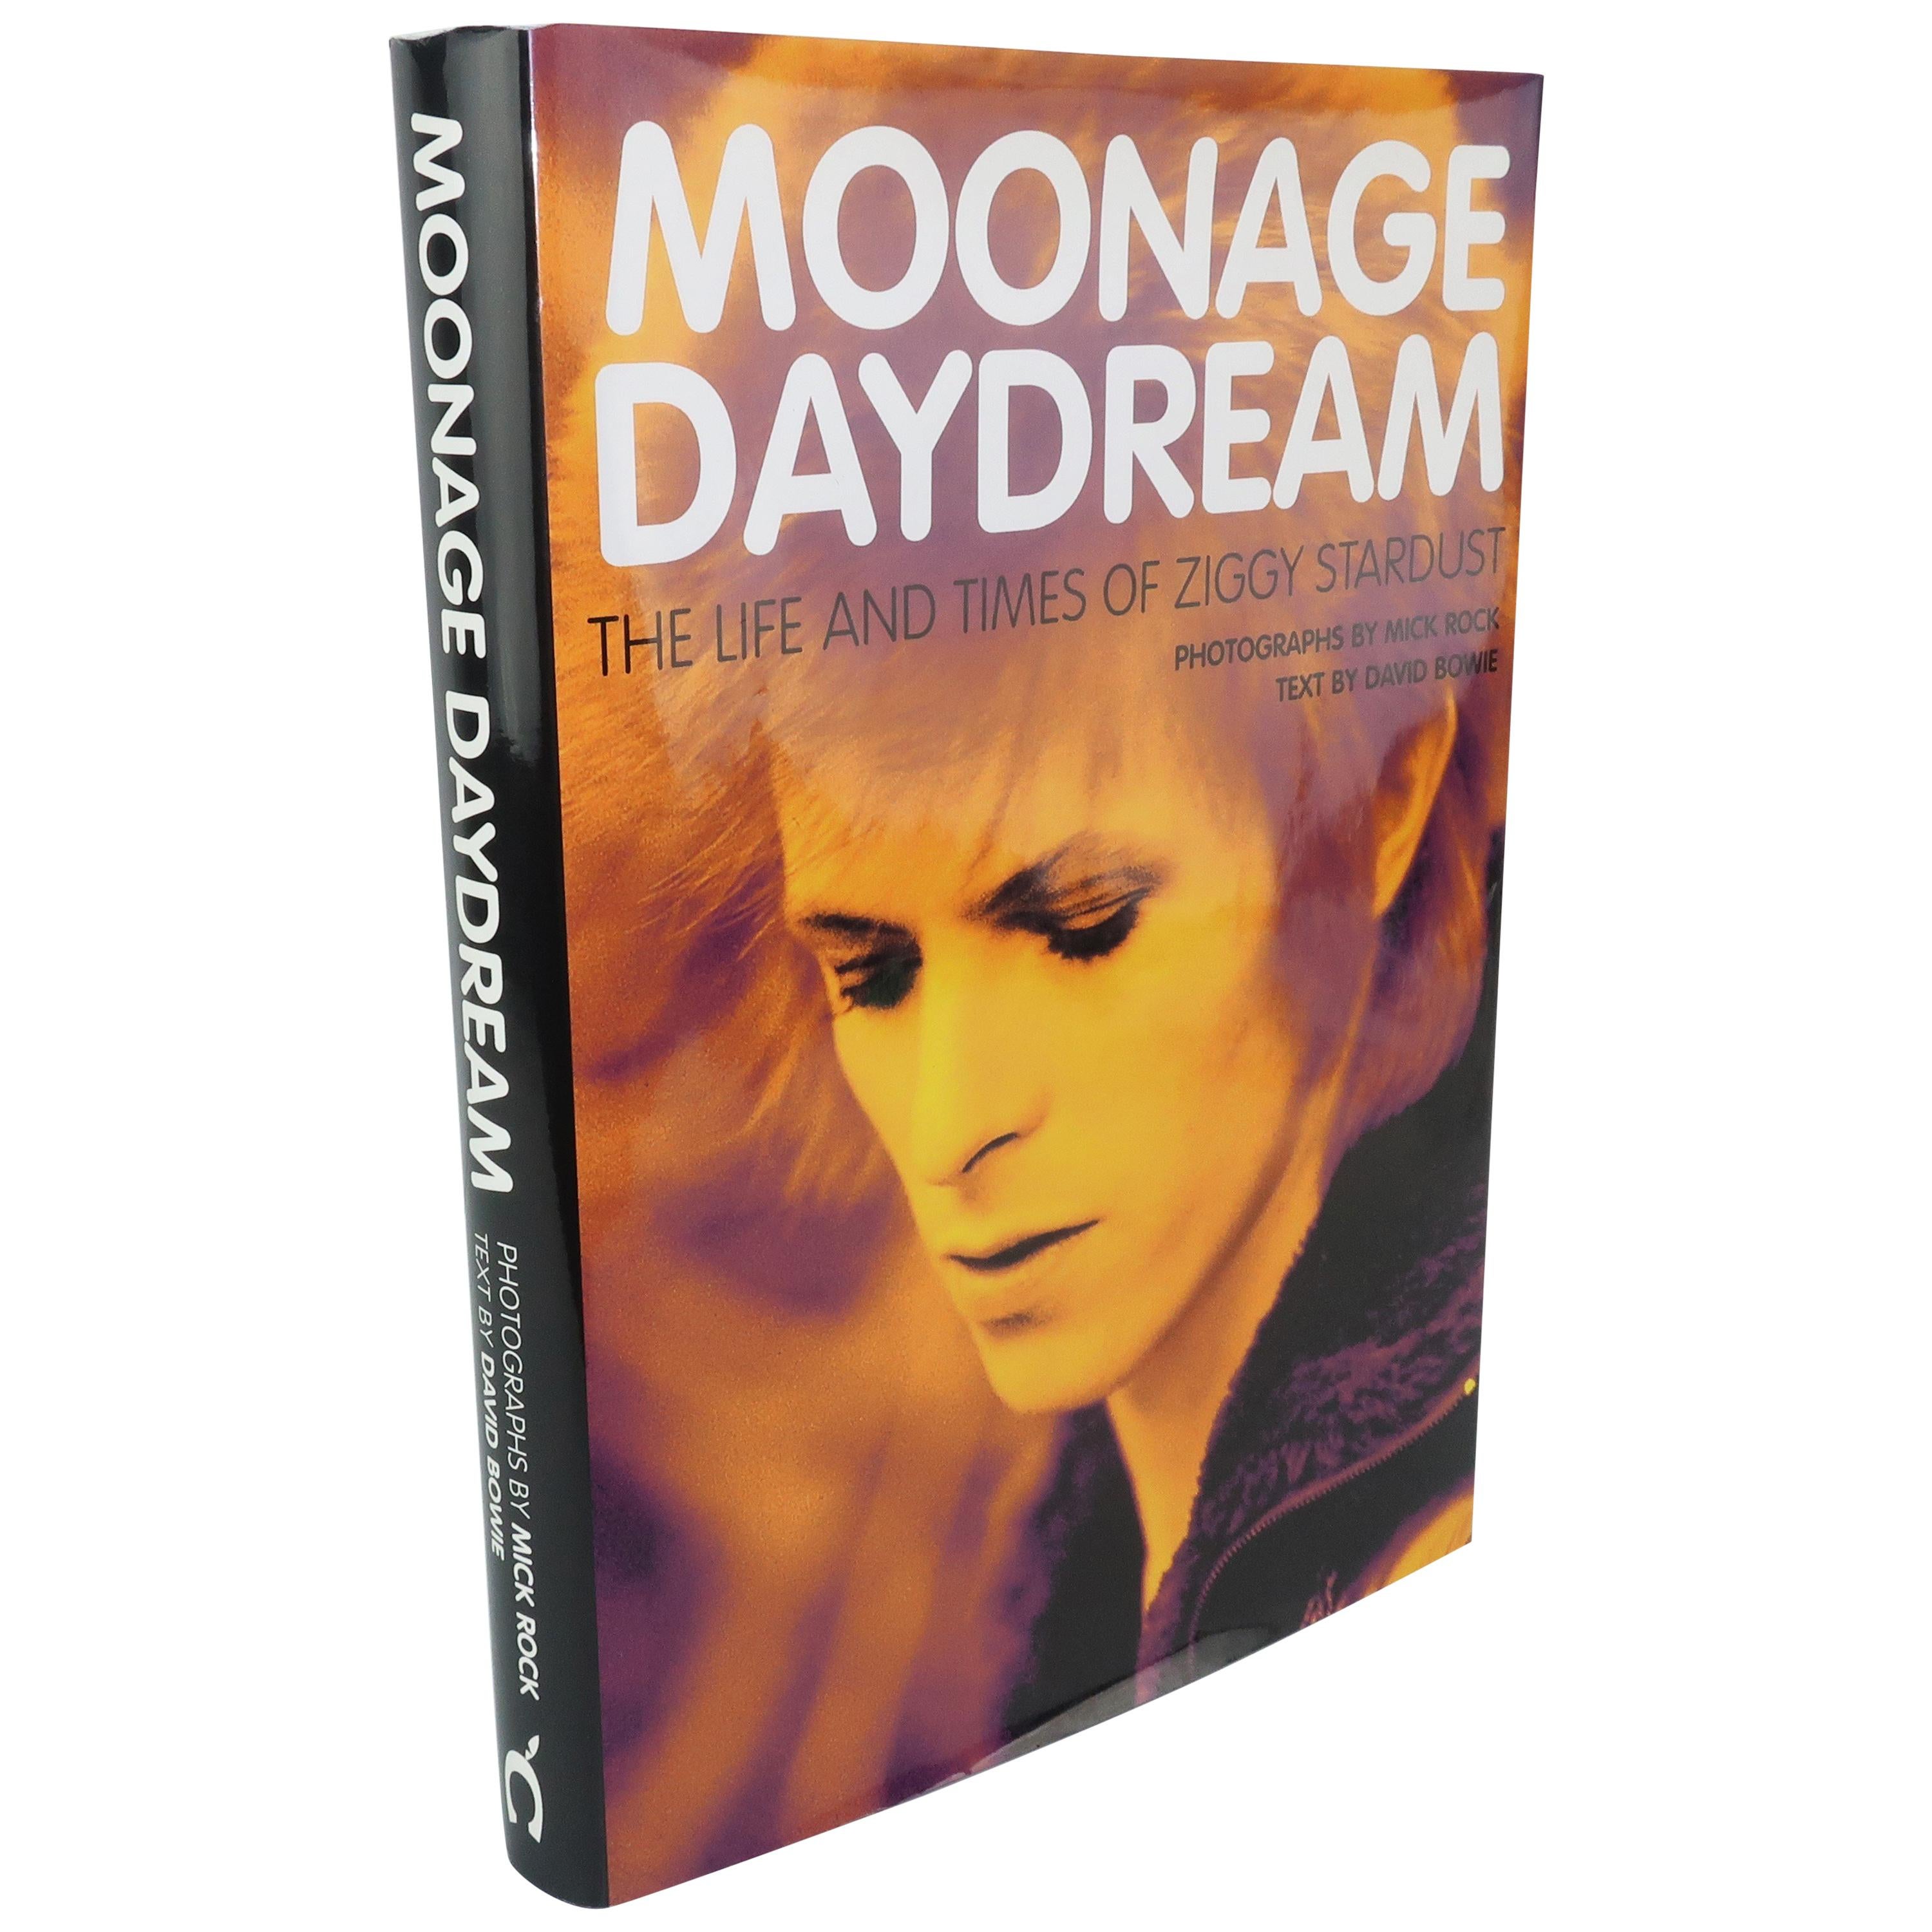 David Bowie’s Moonage Daydream Coffee Table Book of Ziggy Stardust Fashion, 2005